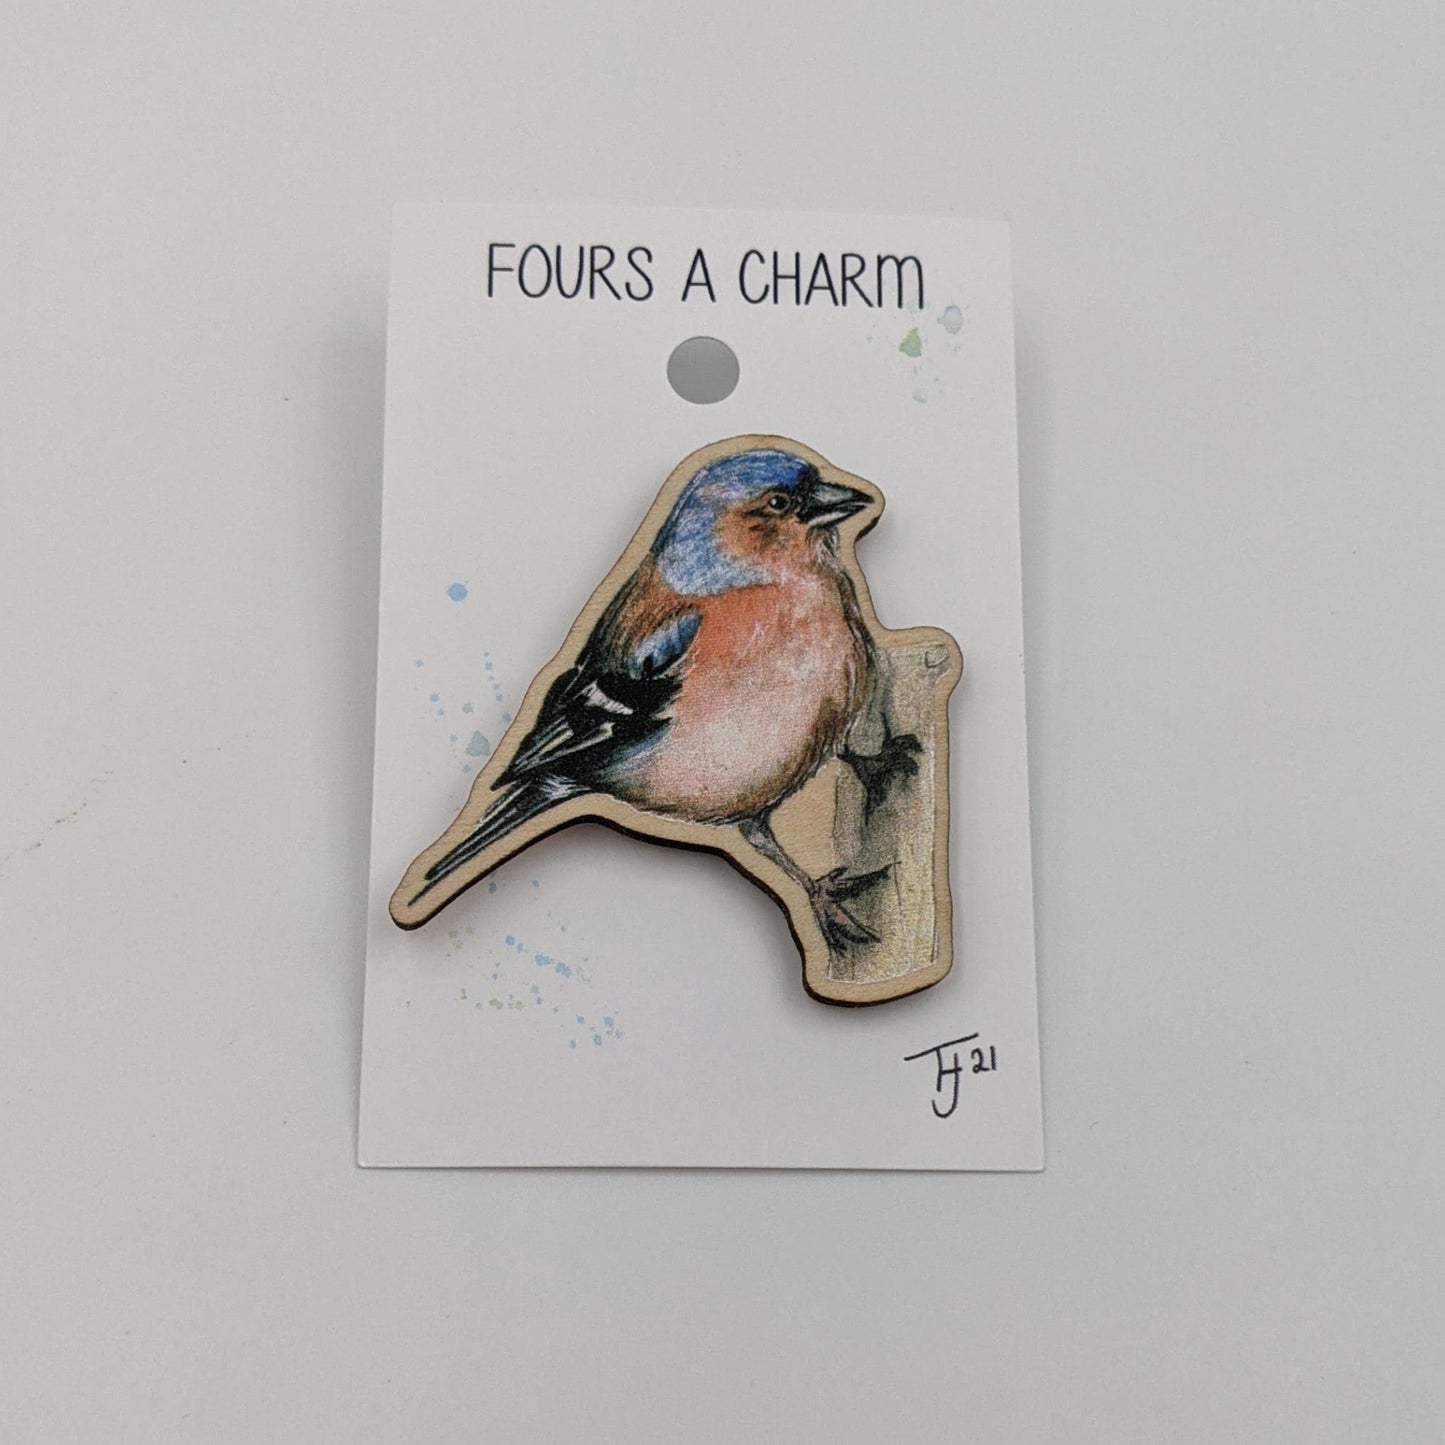 "Fours a Charm" Chaffinch Wooden Fridge Magnet